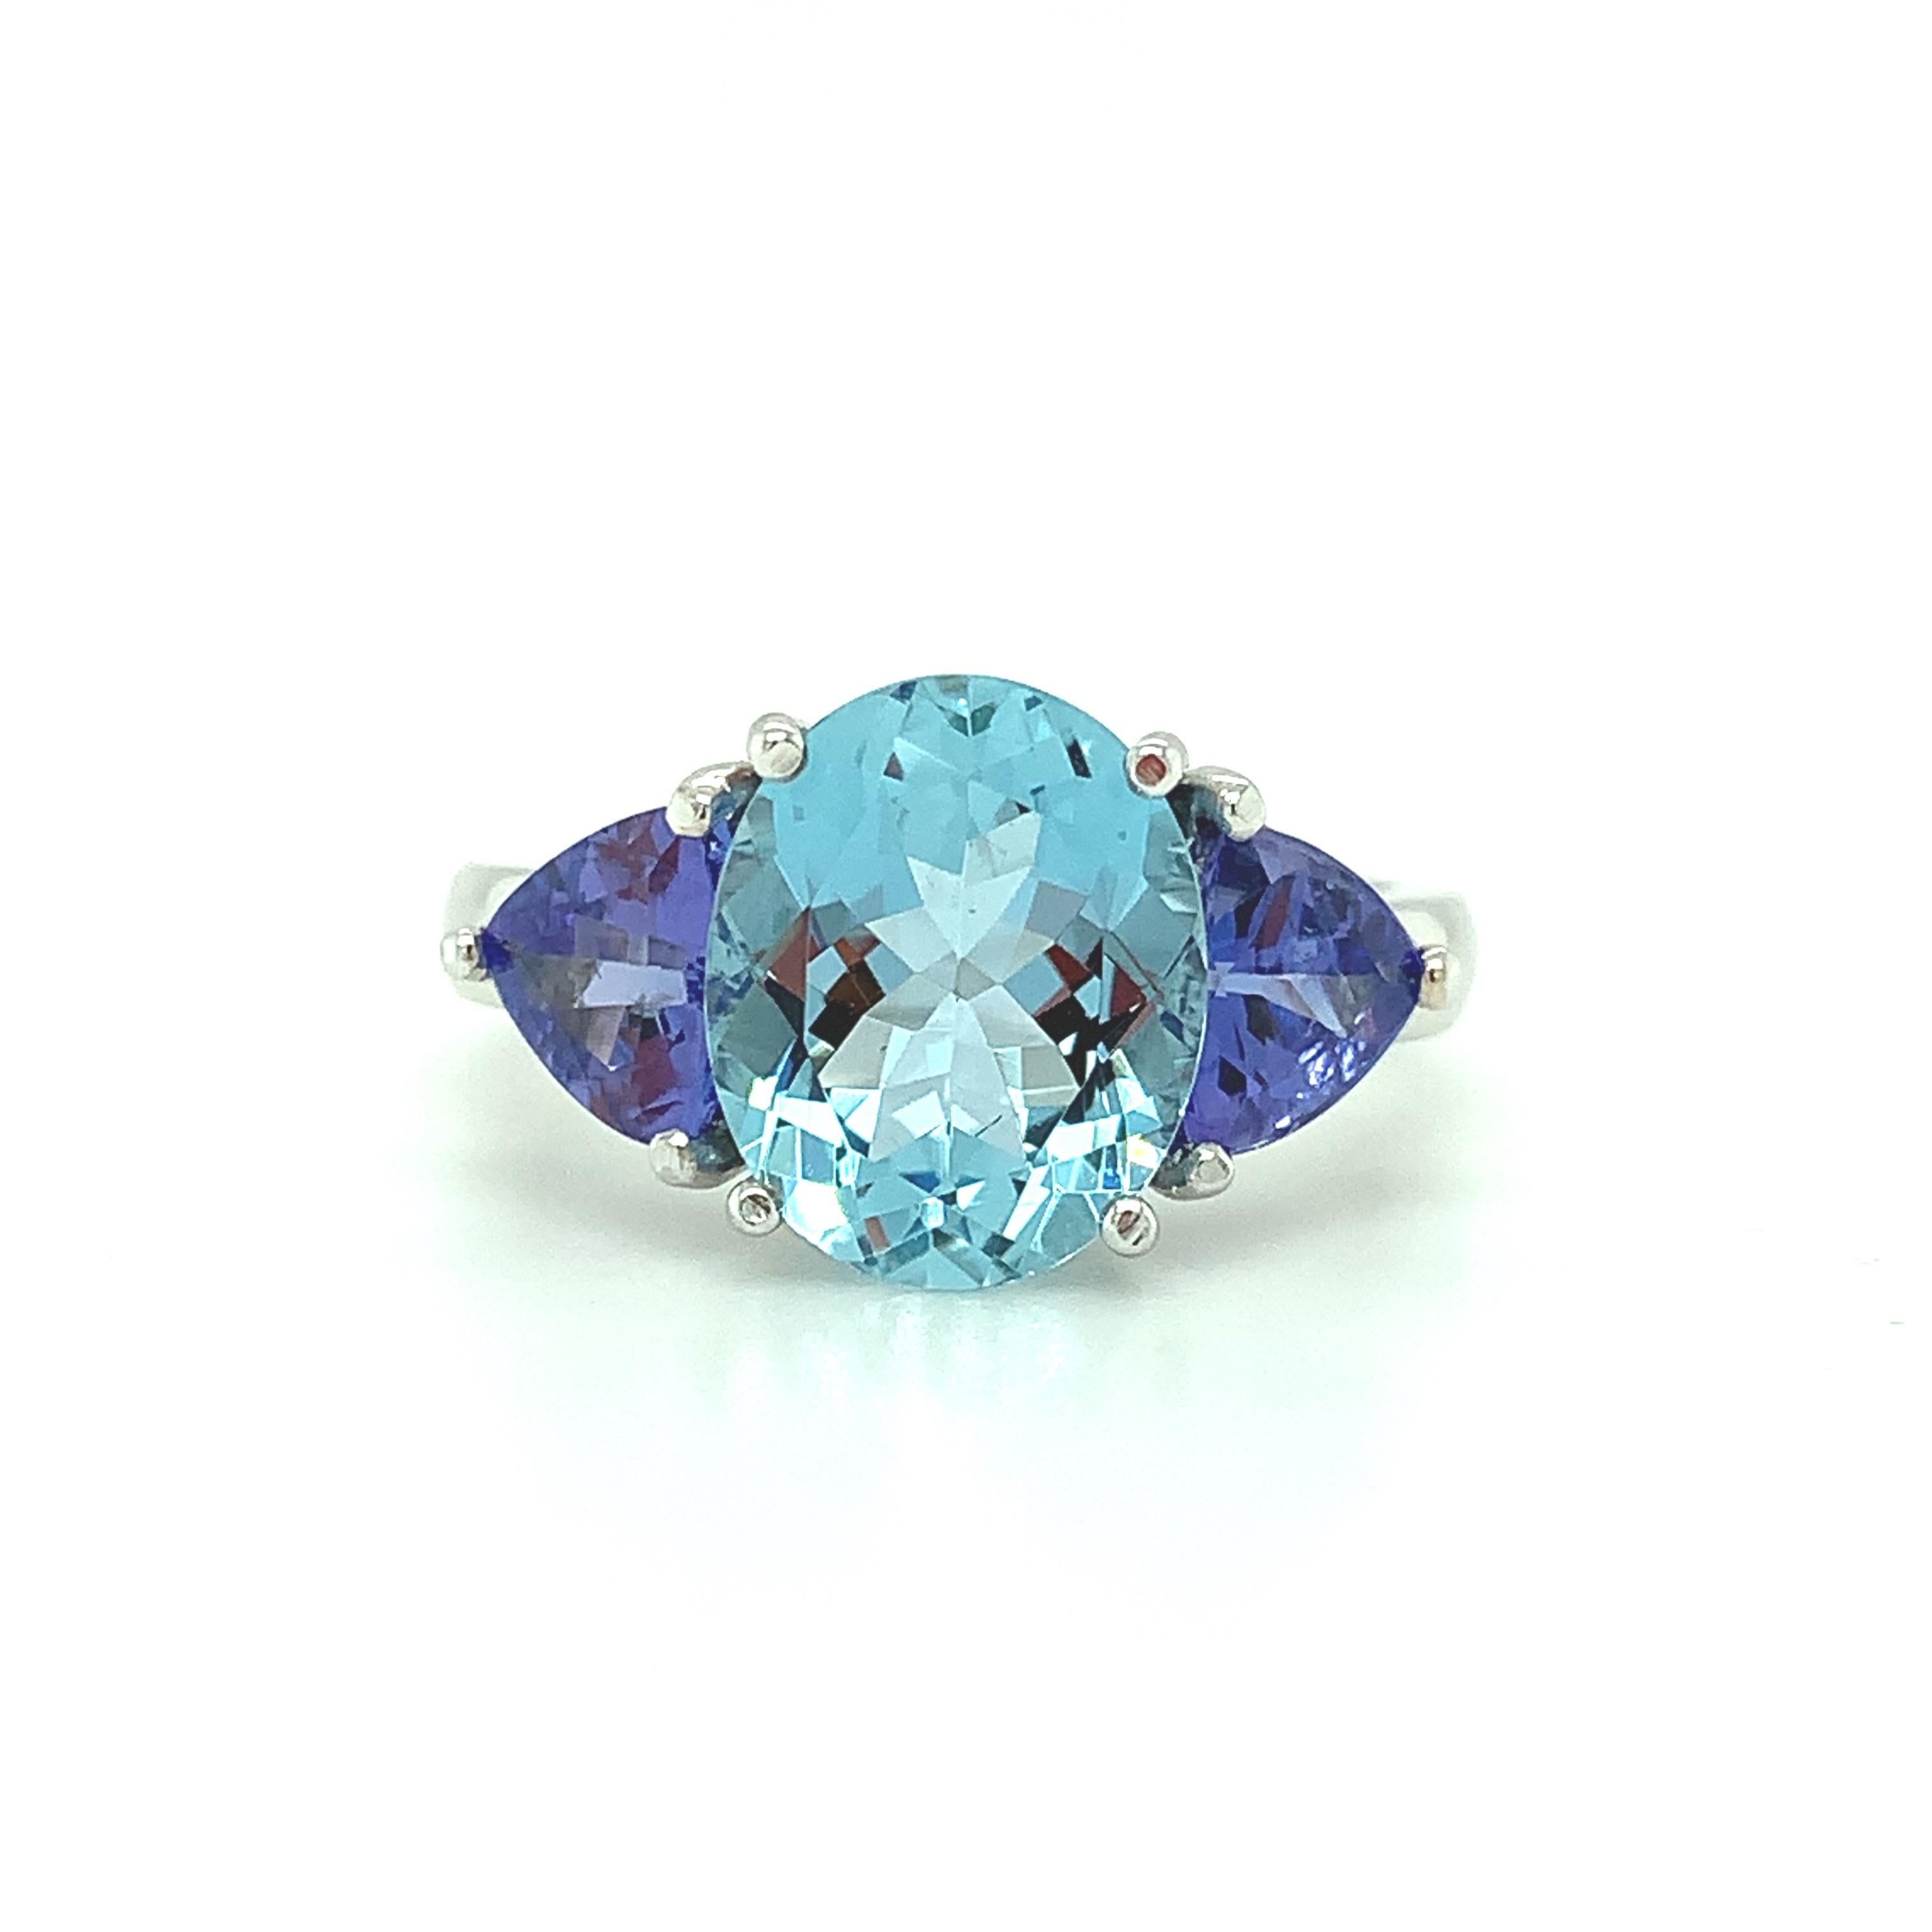 A vivid, Tahitian-blue aquamarine is paired with lavender-blue tanzanites in this beautiful 18k white gold cocktail ring. The aquamarine is a gorgeous, faceted oval with extraordinary clarity and brilliance. The tanzanites are rich in color of the